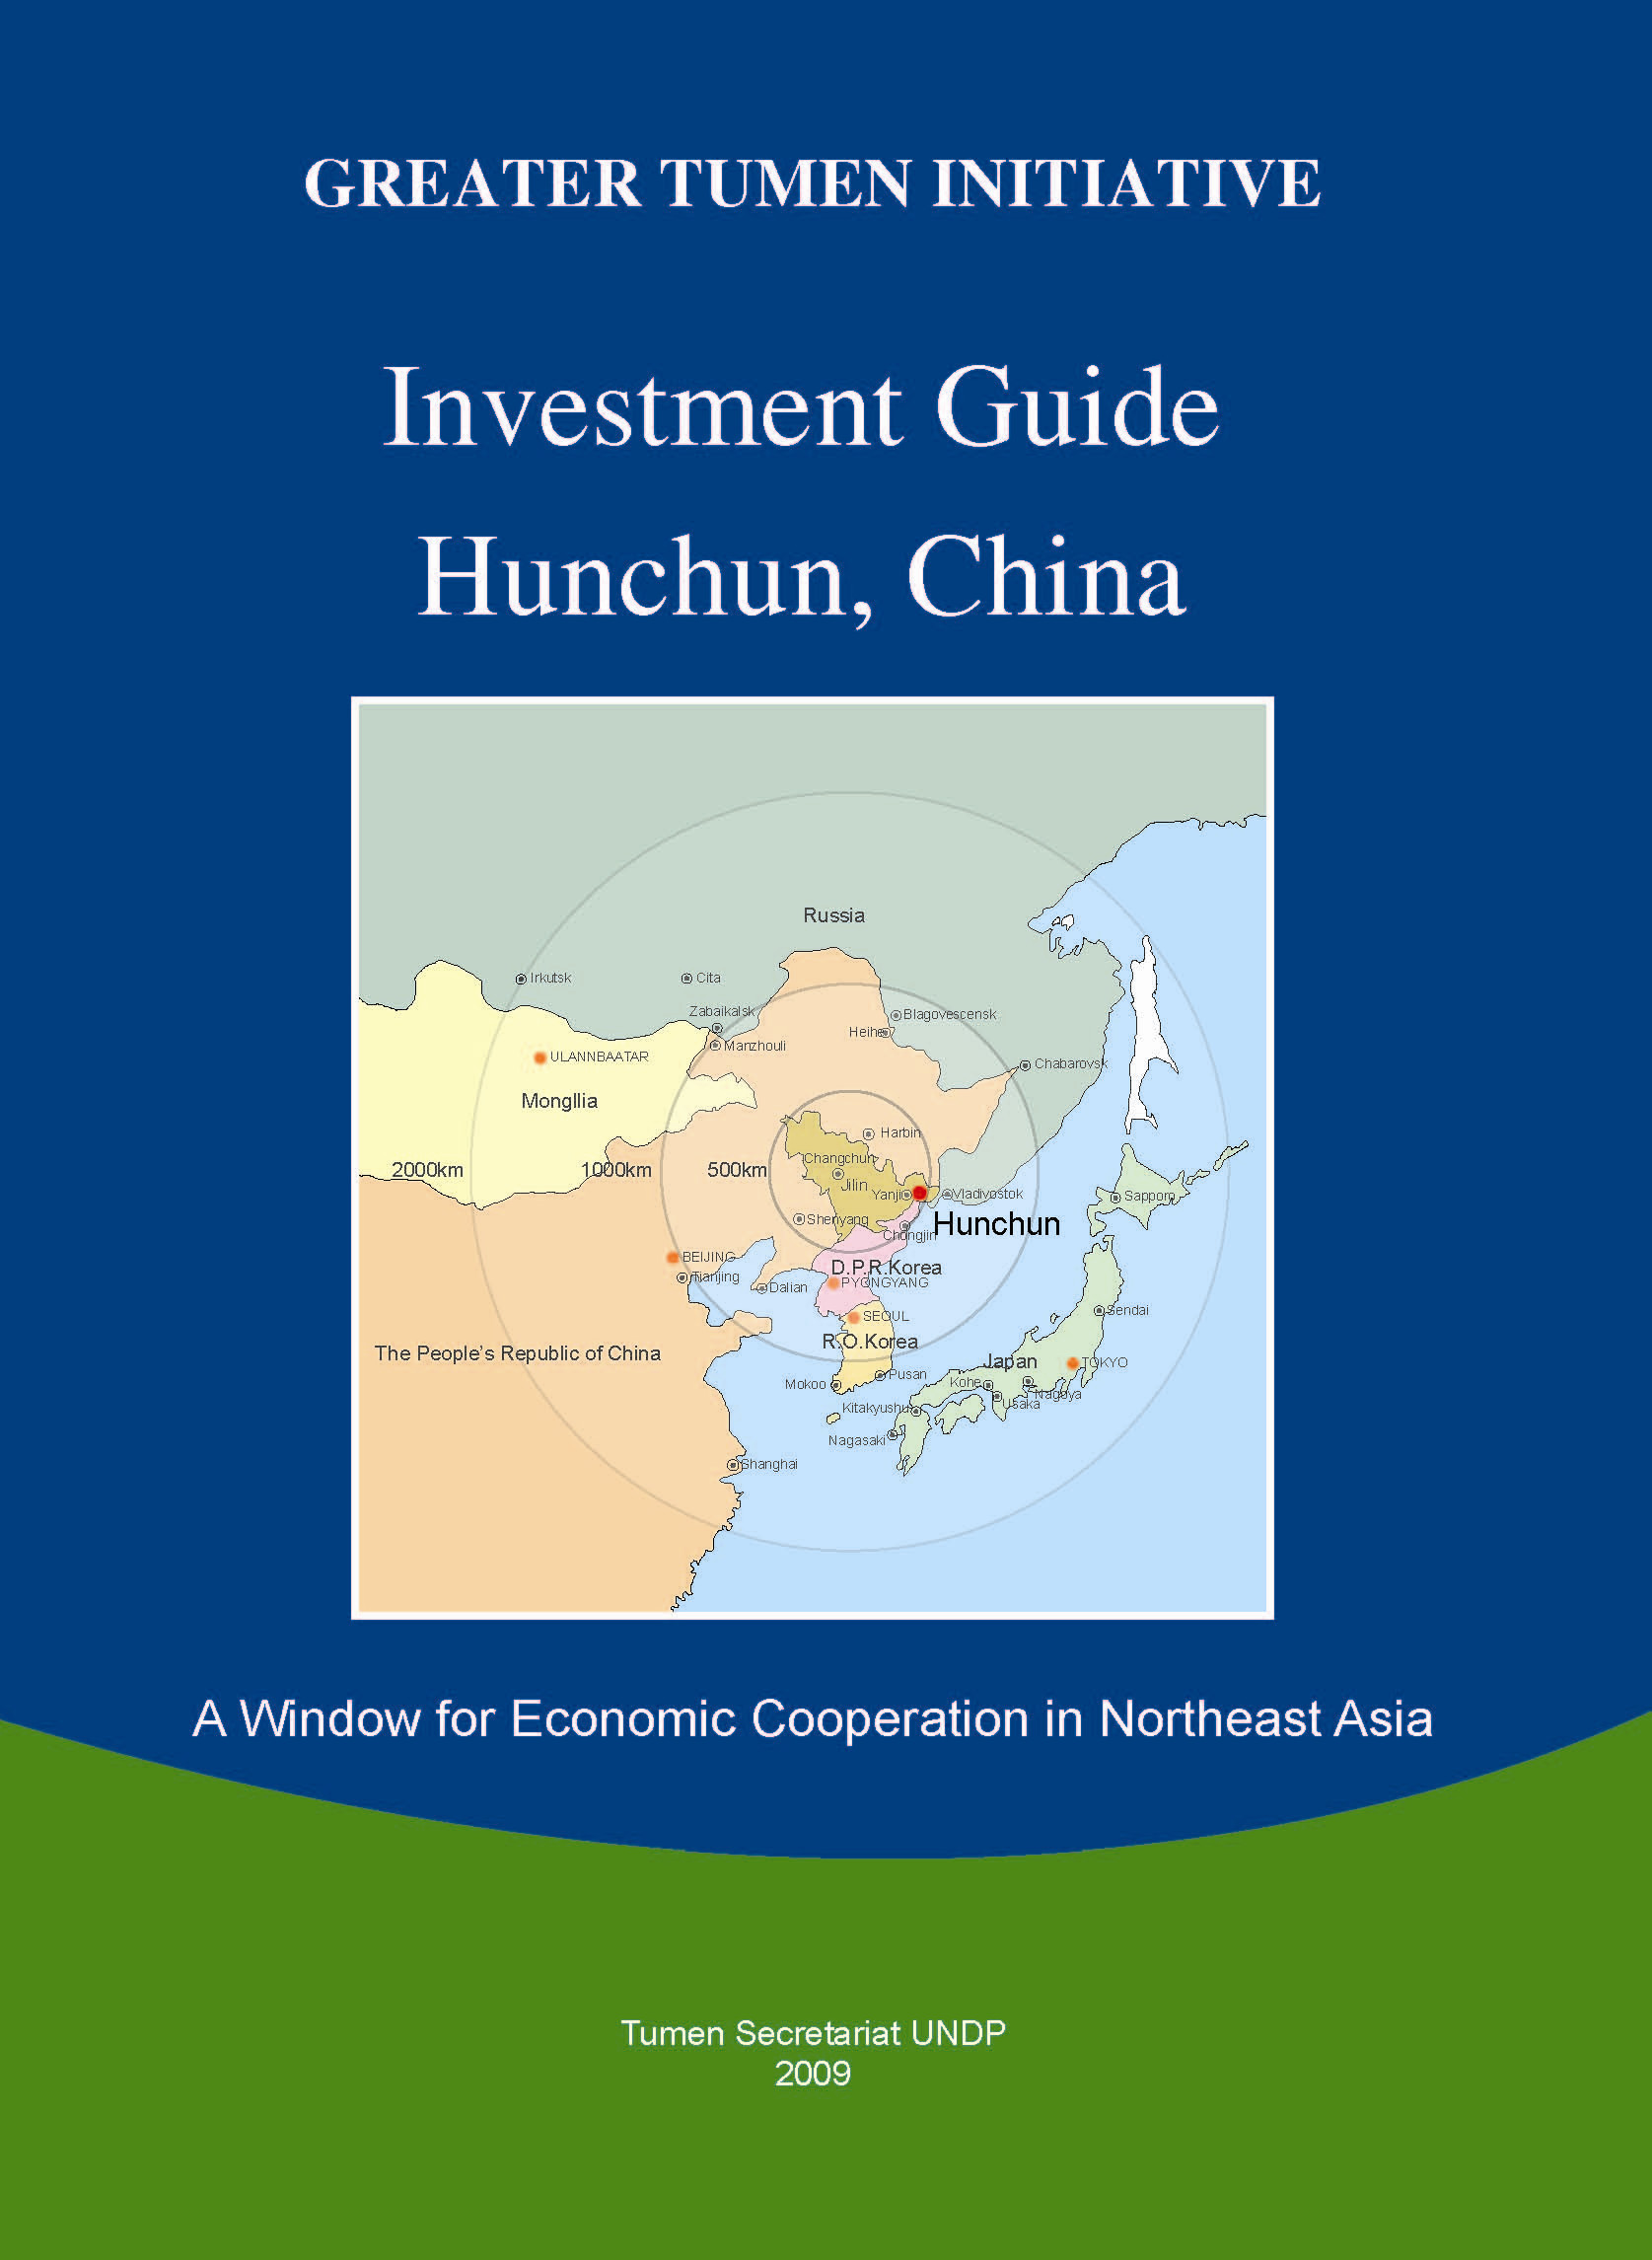 Hunchun Investment Guide